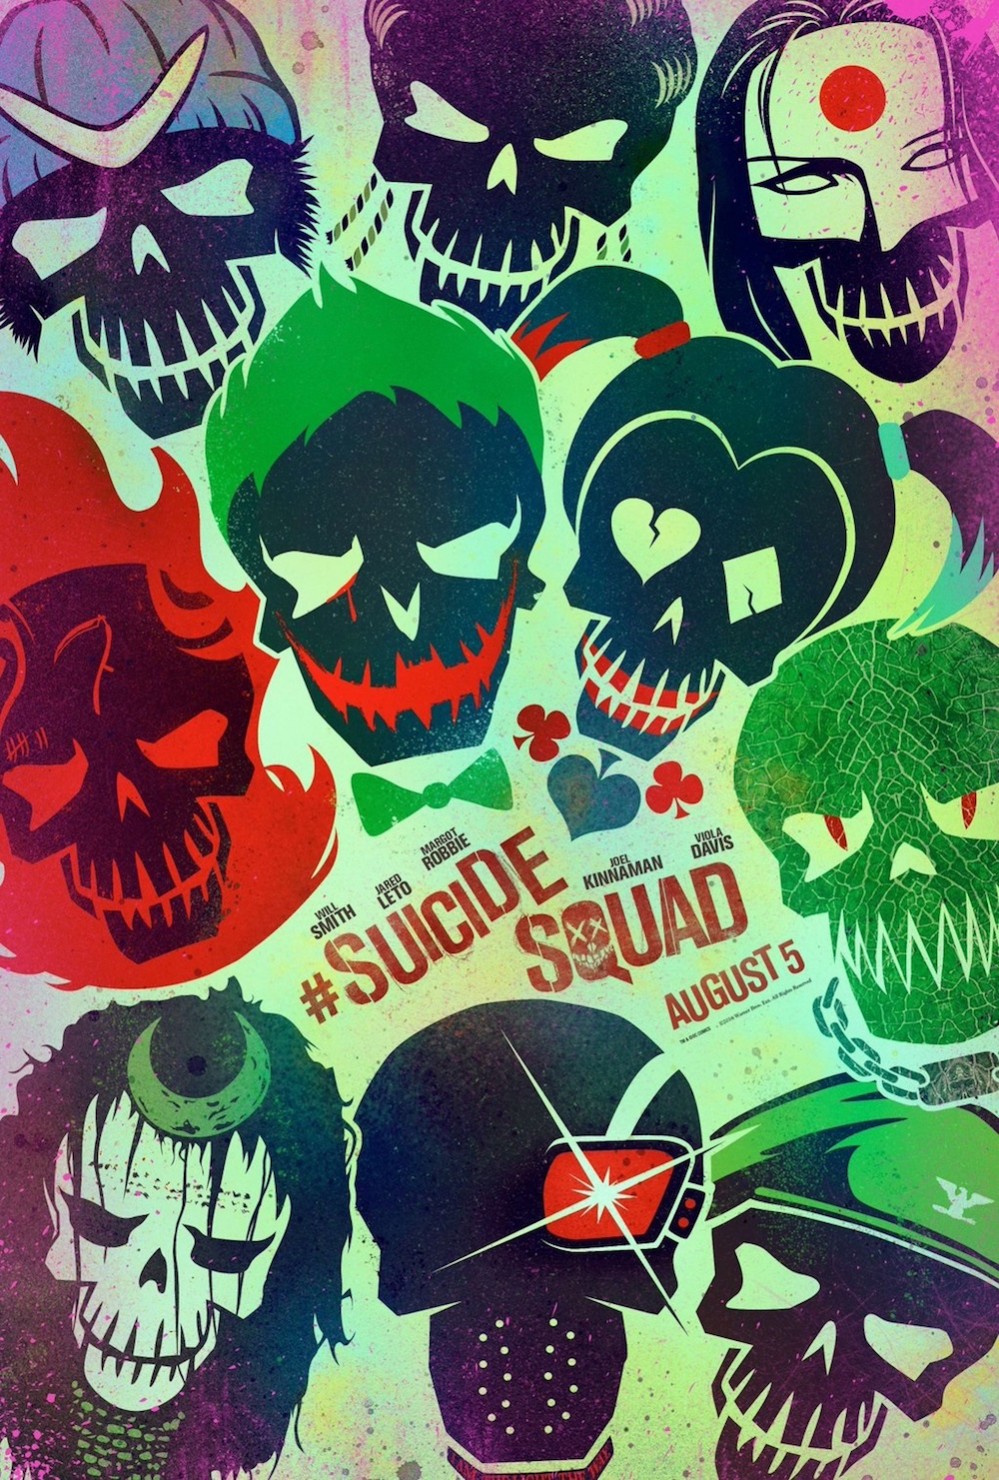 Suicide-Squad-official-poster